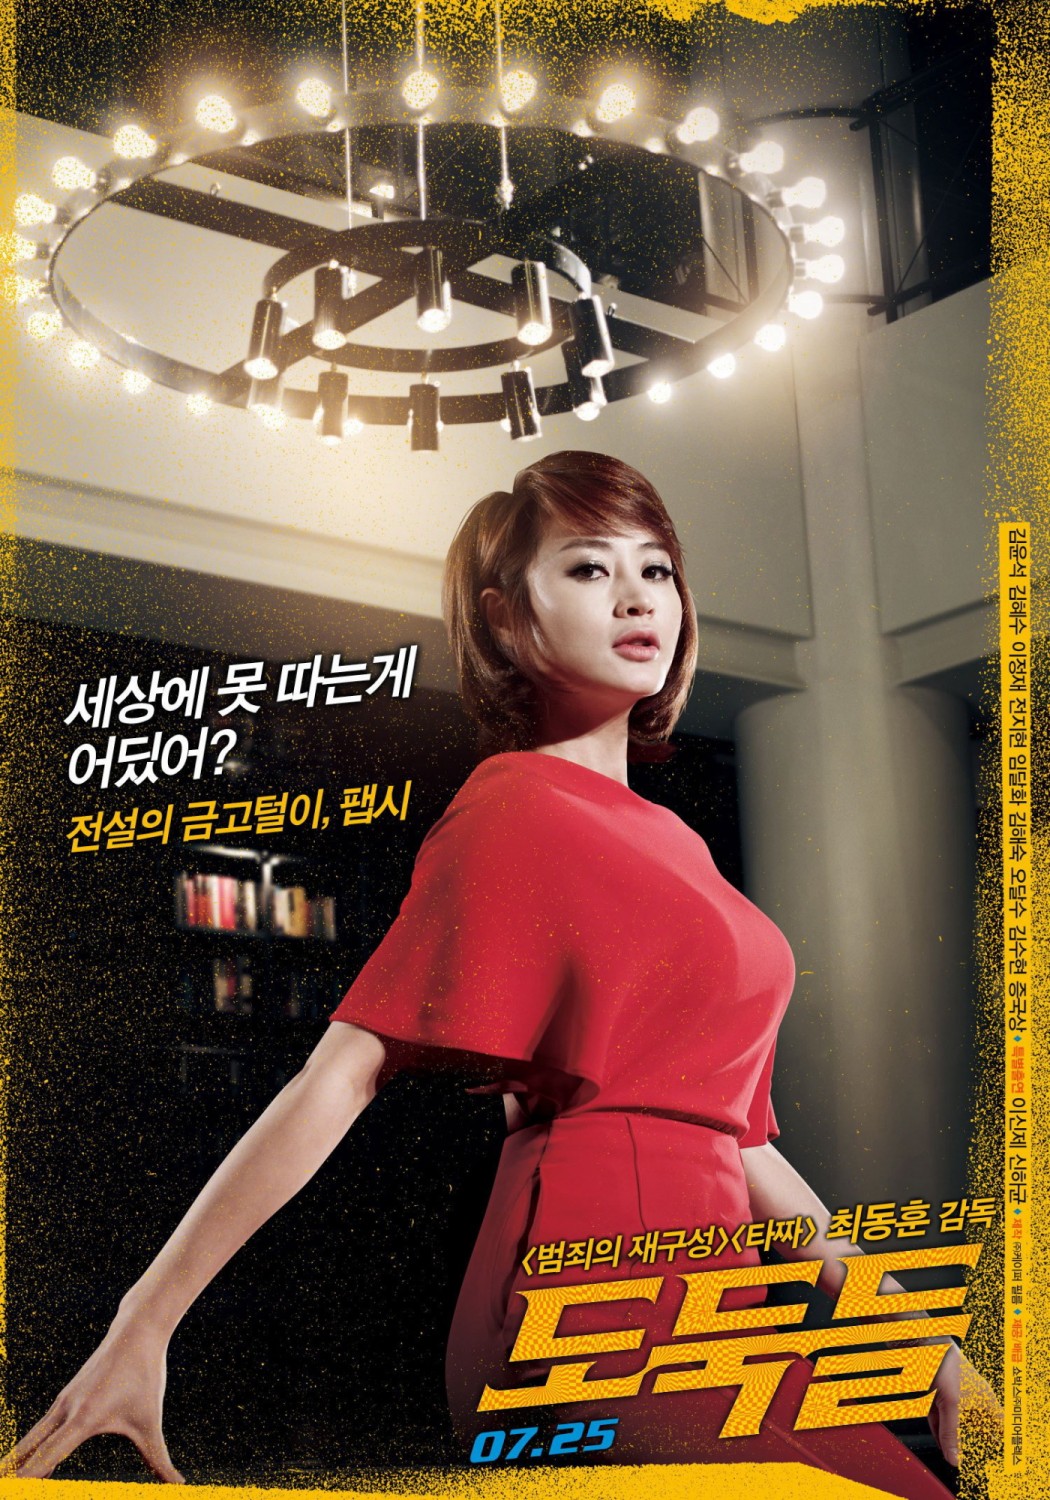 Extra Large Movie Poster Image for Dodookdeul (#6 of 9)